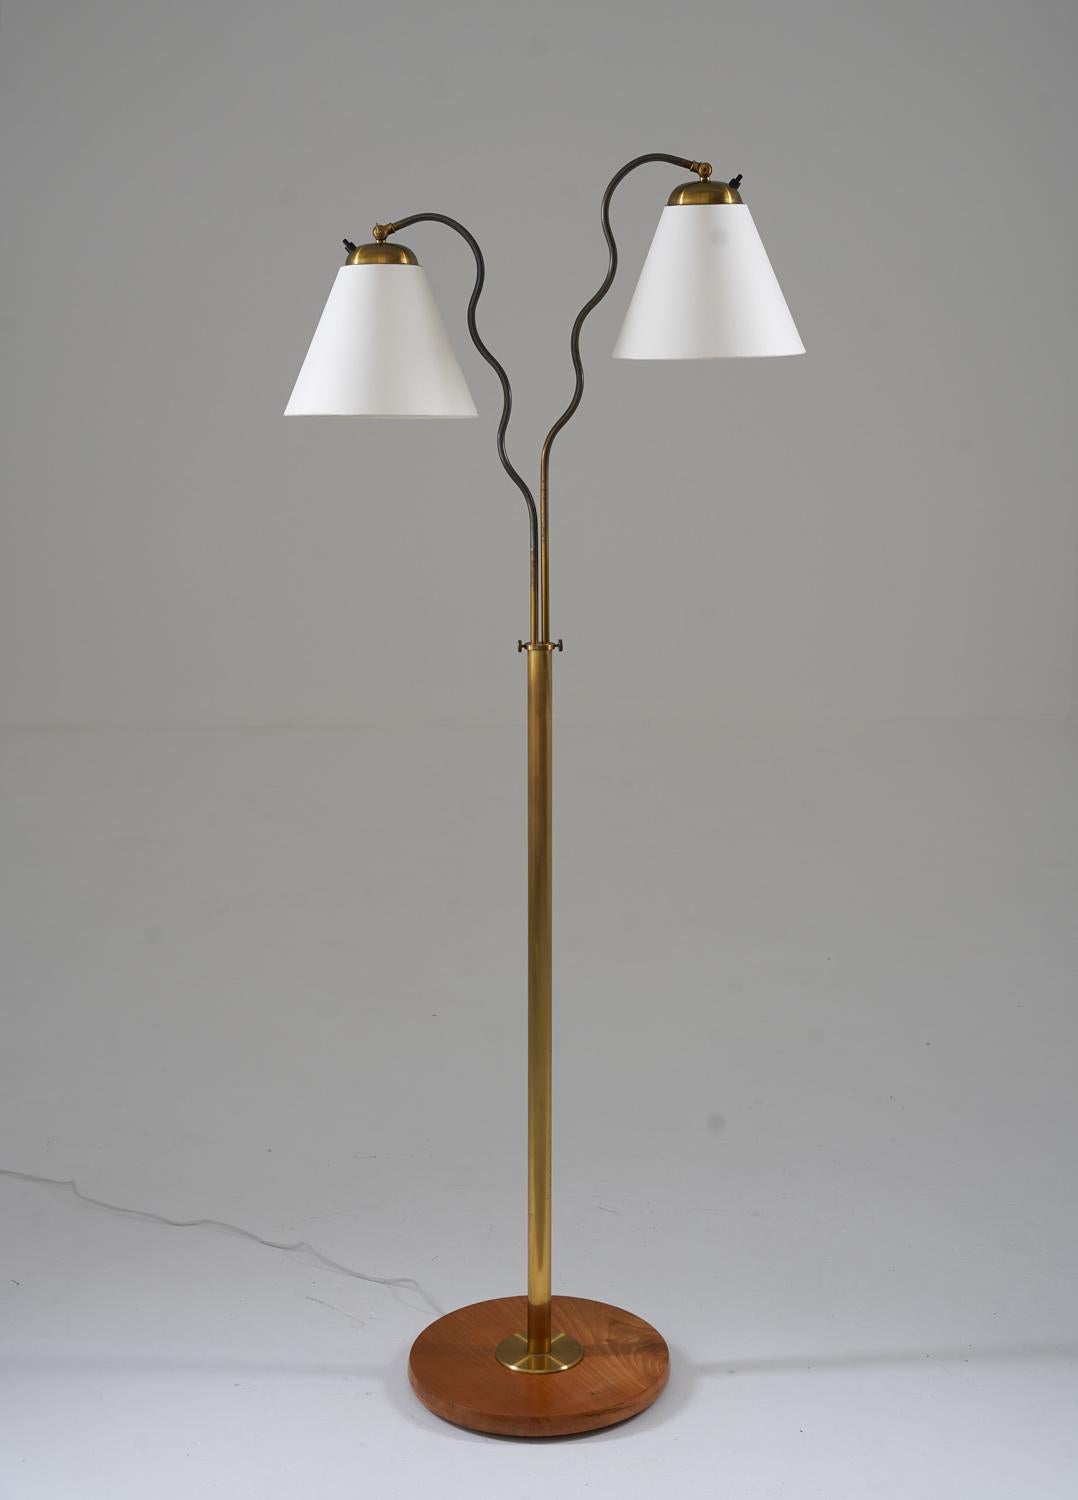 Lovely Swedish Modern floor lamp manufactured in Sweden, 1940s. 
The lamp consists of a wooden base with a brass rod, supporting two wave-shaped swivel arms that hold the shade. 
The height is adjustable between 139-164cm (55-65